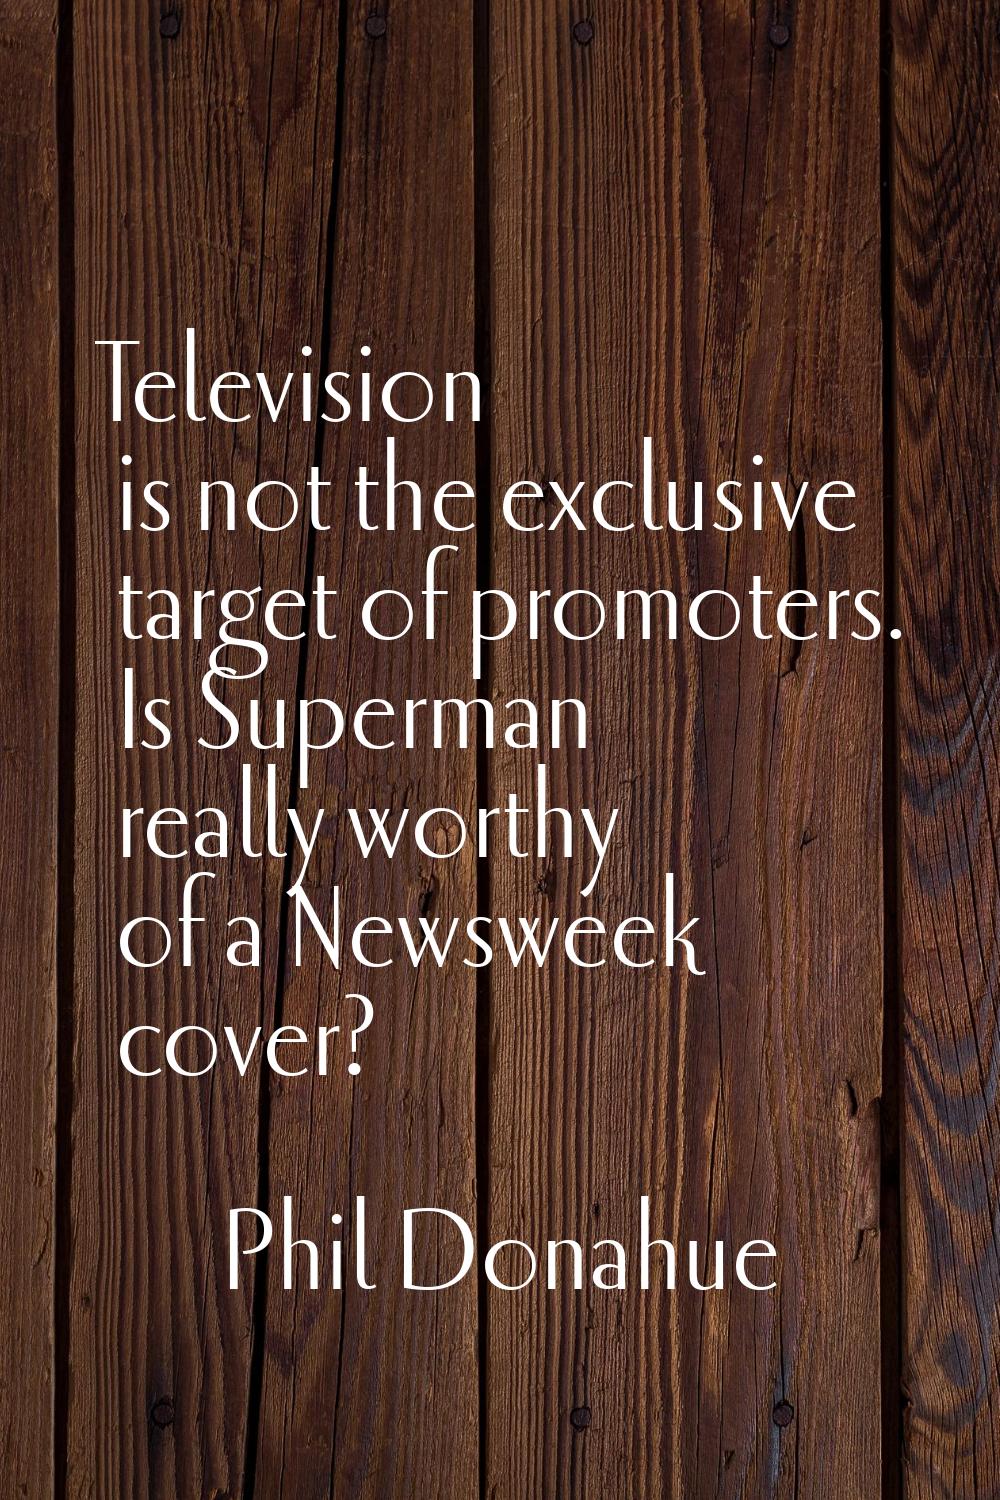 Television is not the exclusive target of promoters. Is Superman really worthy of a Newsweek cover?